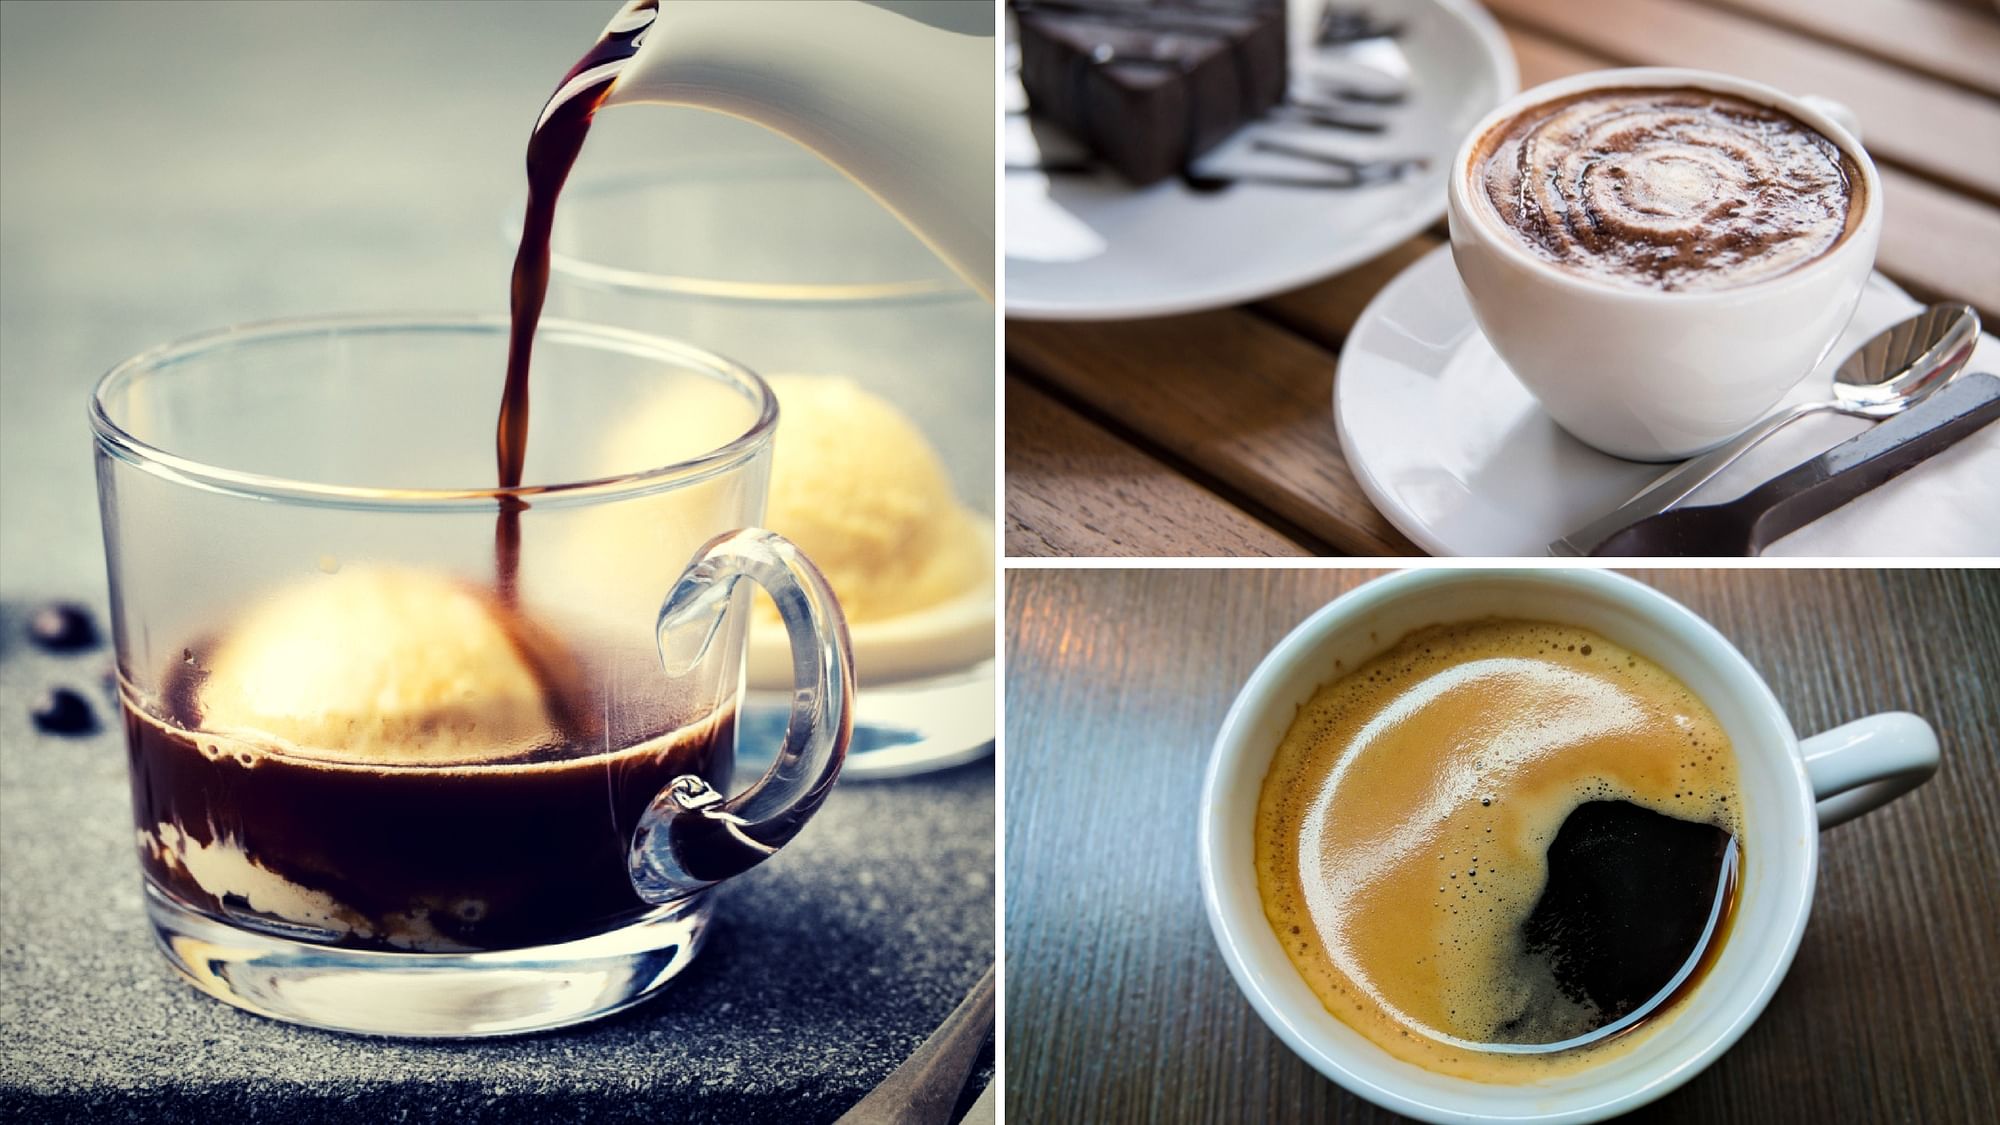 Here’s a quick guide to your coffee – AND what it says about your personality!